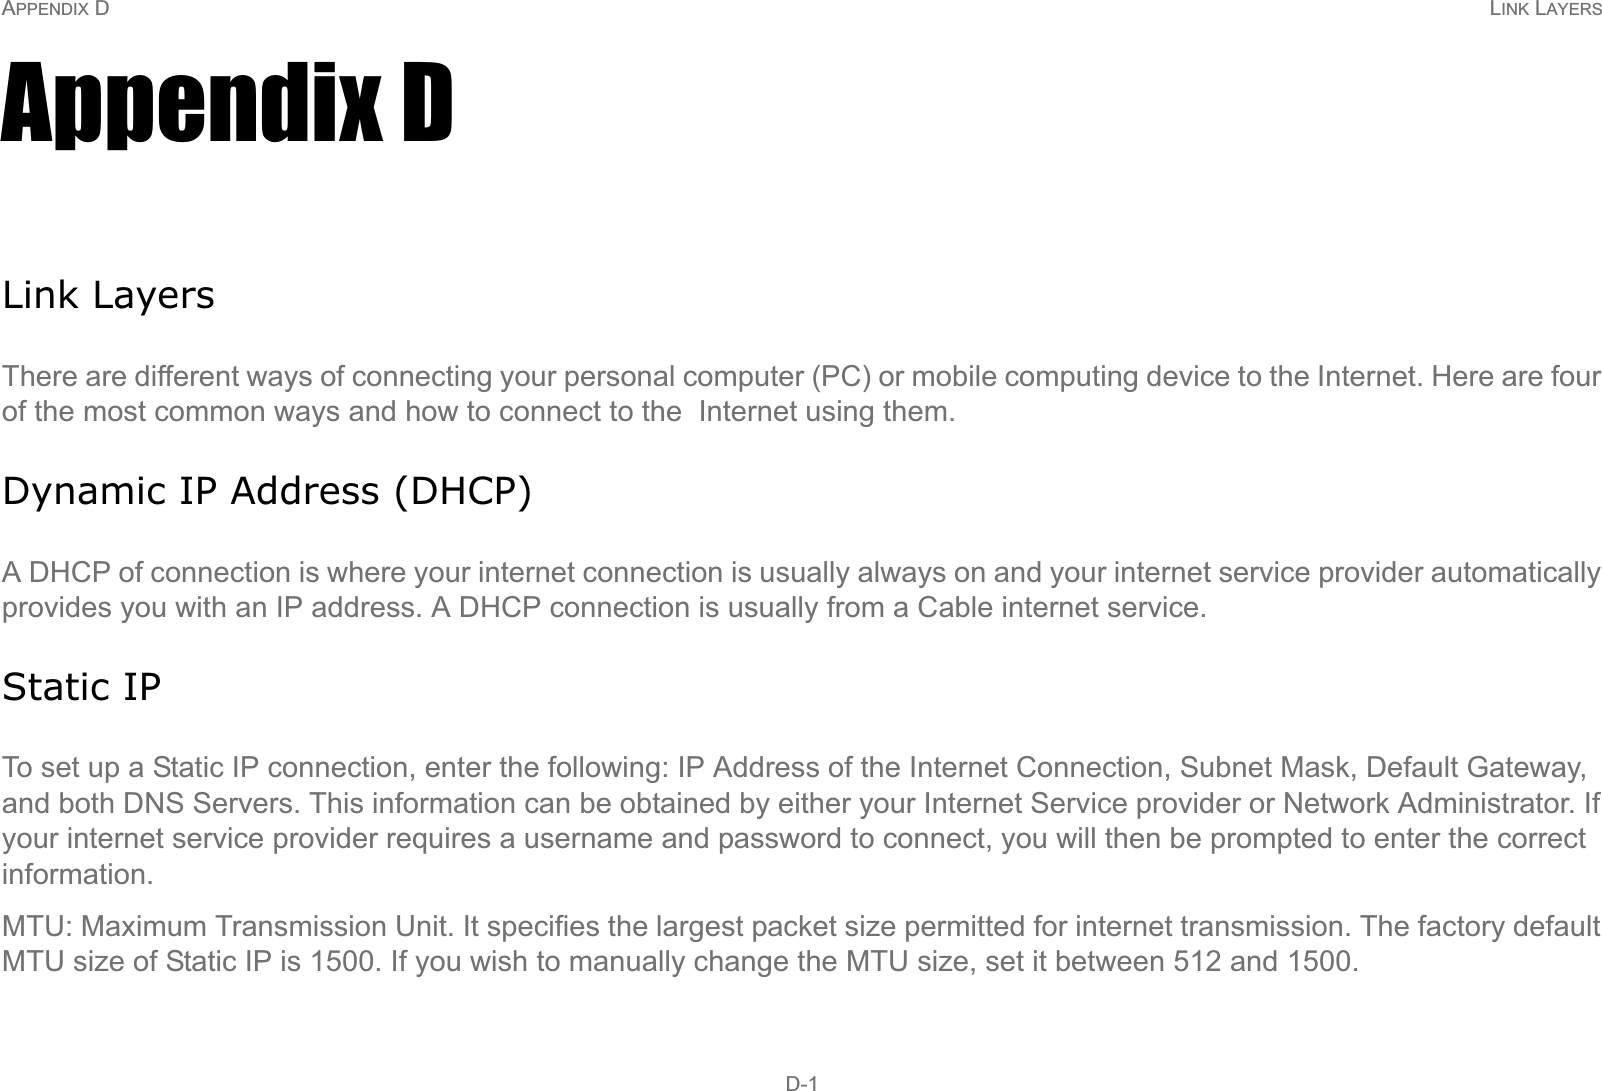 APPENDIX D LINK LAYERS D-1Appendix DLink LayersThere are different ways of connecting your personal computer (PC) or mobile computing device to the Internet. Here are four of the most common ways and how to connect to the  Internet using them.Dynamic IP Address (DHCP)A DHCP of connection is where your internet connection is usually always on and your internet service provider automatically provides you with an IP address. A DHCP connection is usually from a Cable internet service.Static IPTo set up a Static IP connection, enter the following: IP Address of the Internet Connection, Subnet Mask, Default Gateway, and both DNS Servers. This information can be obtained by either your Internet Service provider or Network Administrator. If your internet service provider requires a username and password to connect, you will then be prompted to enter the correct information.MTU: Maximum Transmission Unit. It specifies the largest packet size permitted for internet transmission. The factory default MTU size of Static IP is 1500. If you wish to manually change the MTU size, set it between 512 and 1500. 